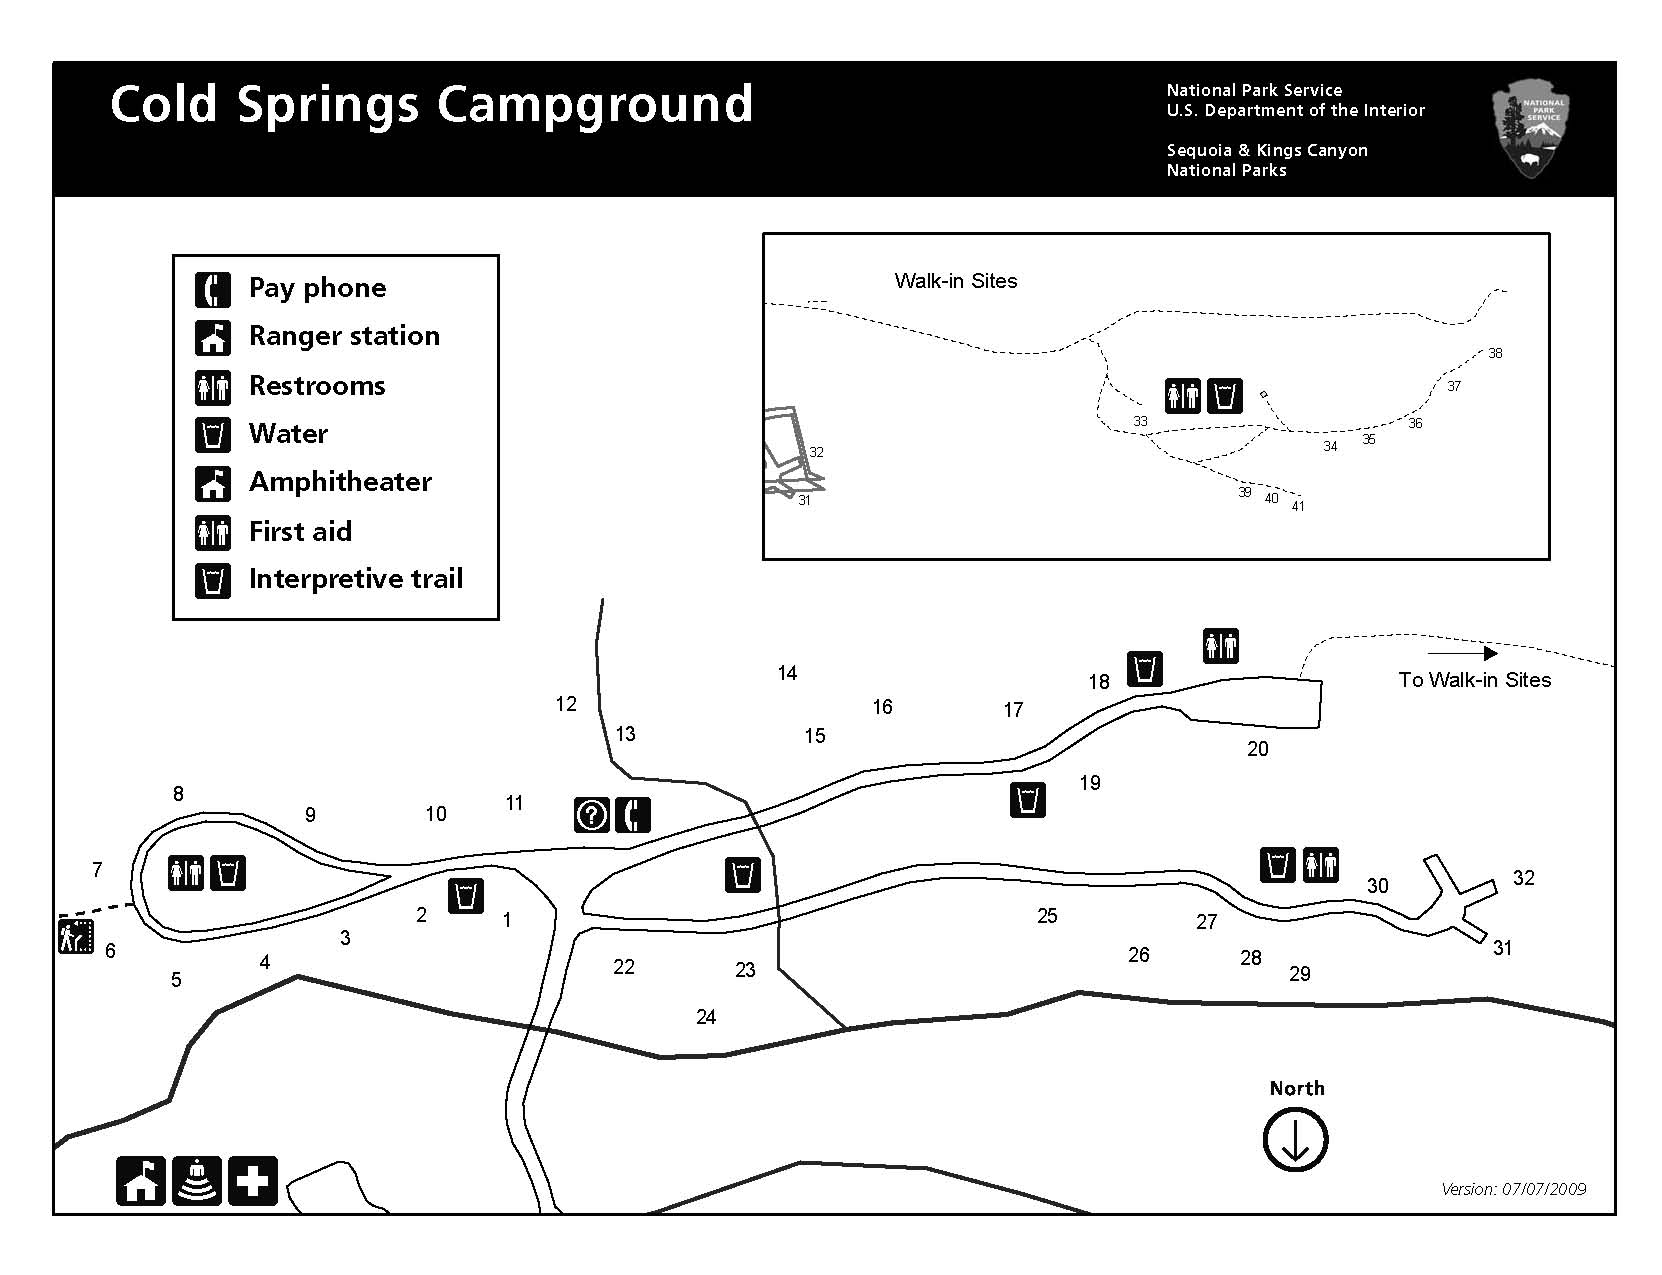 Cold Springs Campground - Sequoia & Kings Canyon National Parks (U.S